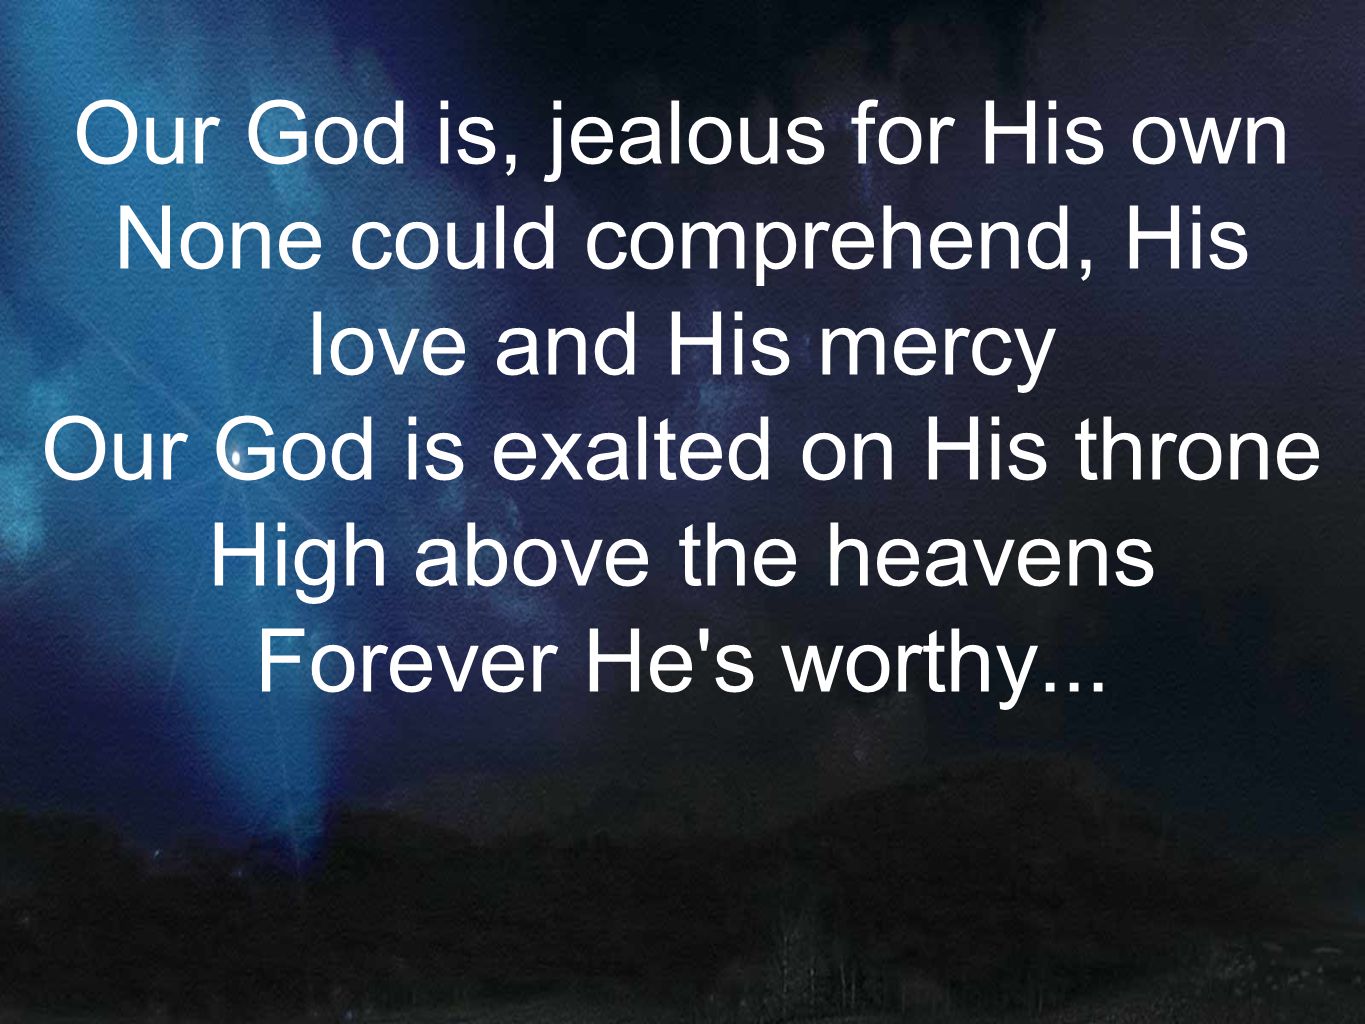 Our God is, jealous for His own None could comprehend, His love and His mercy Our God is exalted on His throne High above the heavens Forever He s worthy...